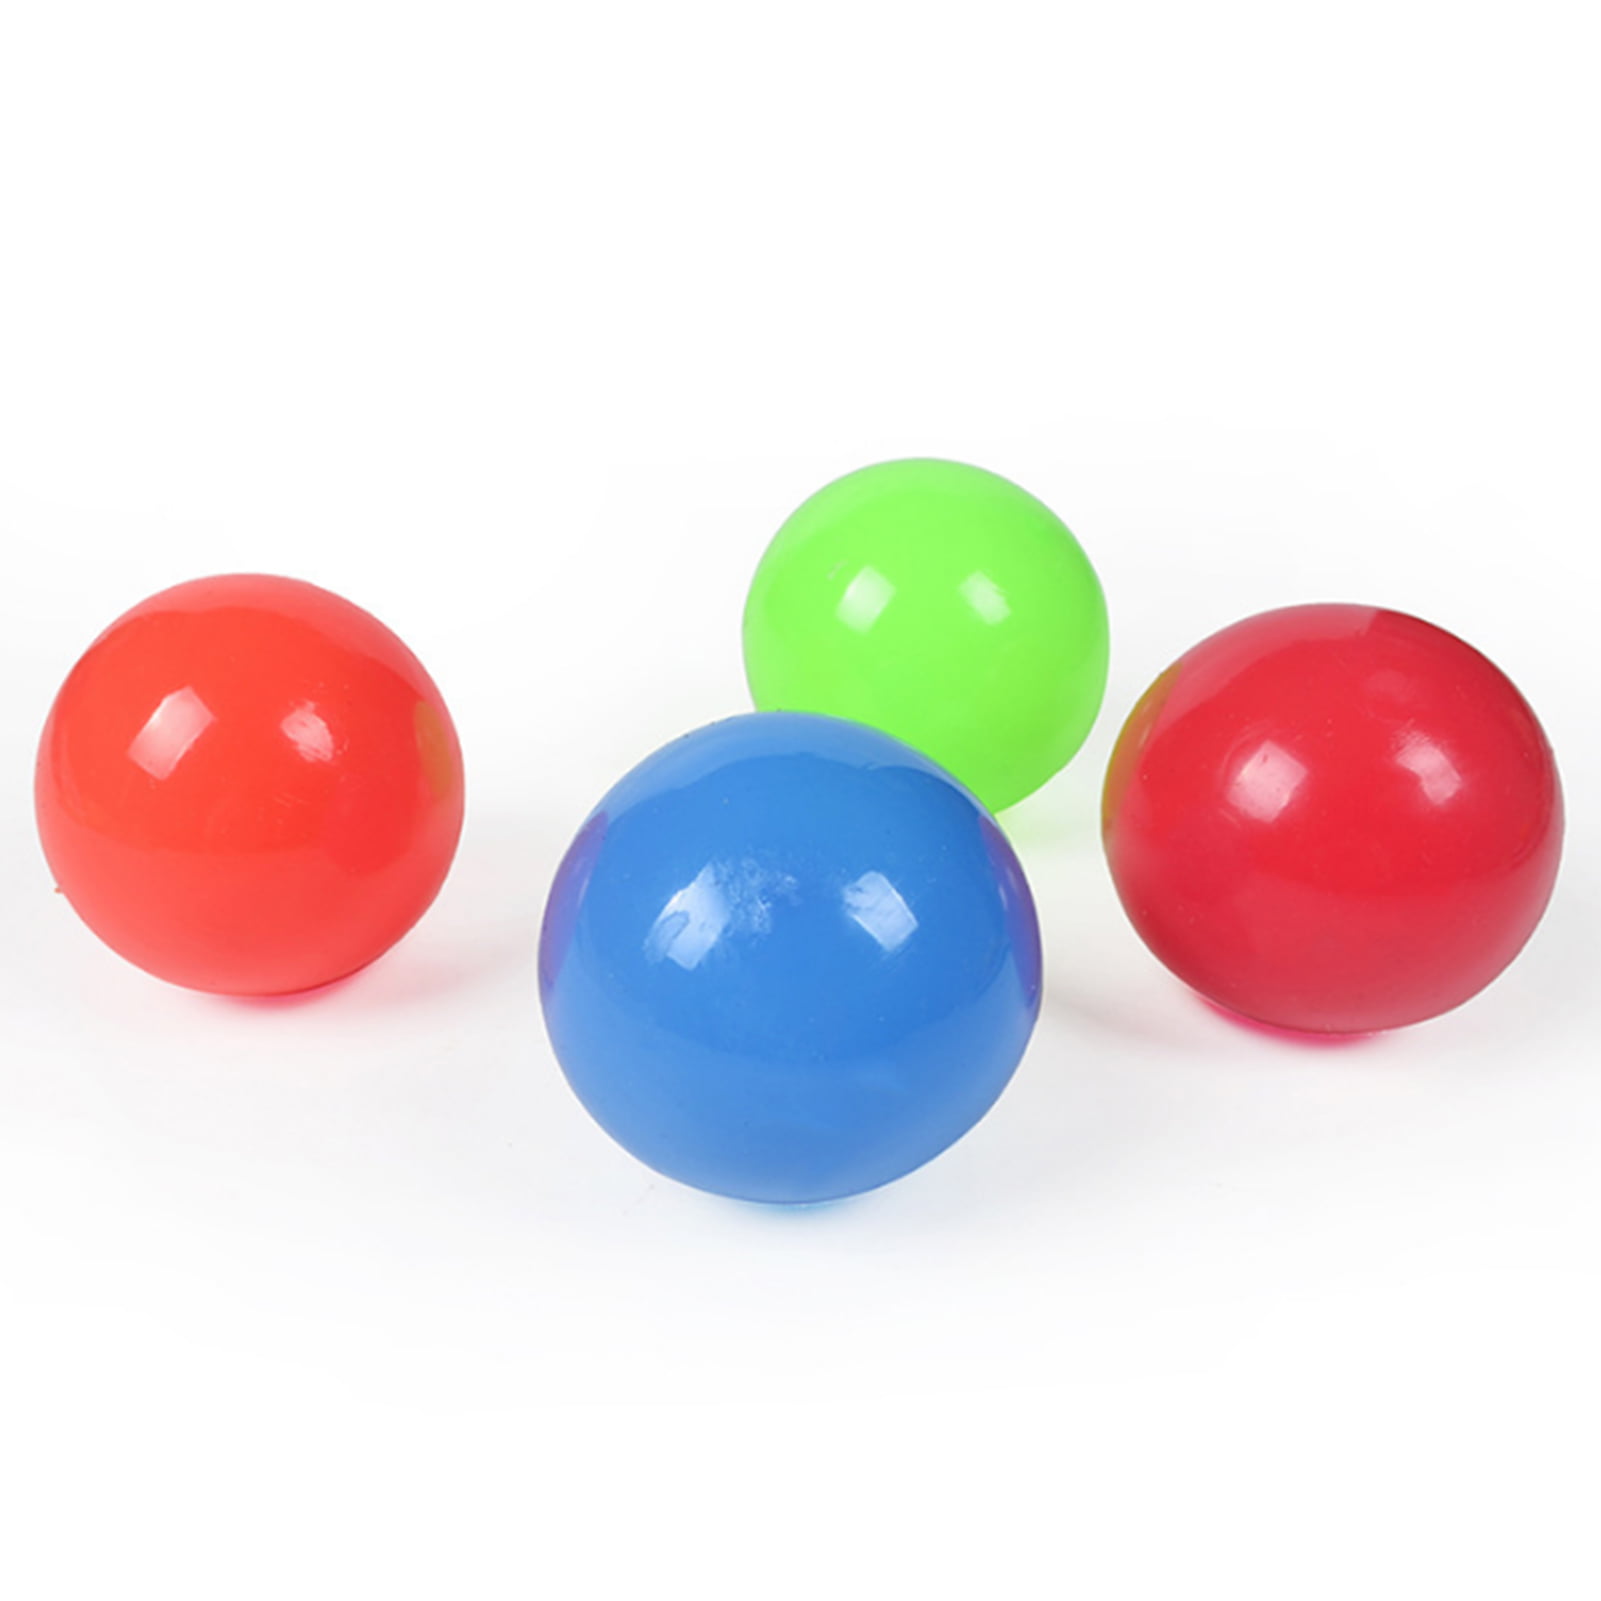 Fruit Squeezing Sticky Target Anti Stress Reliever Balls,Globbles Sticky Balls That Gets Stuck On The Roof,Decompression Ball Toy Gift for Kids and Adults 9PCS Stress Balls Toys 